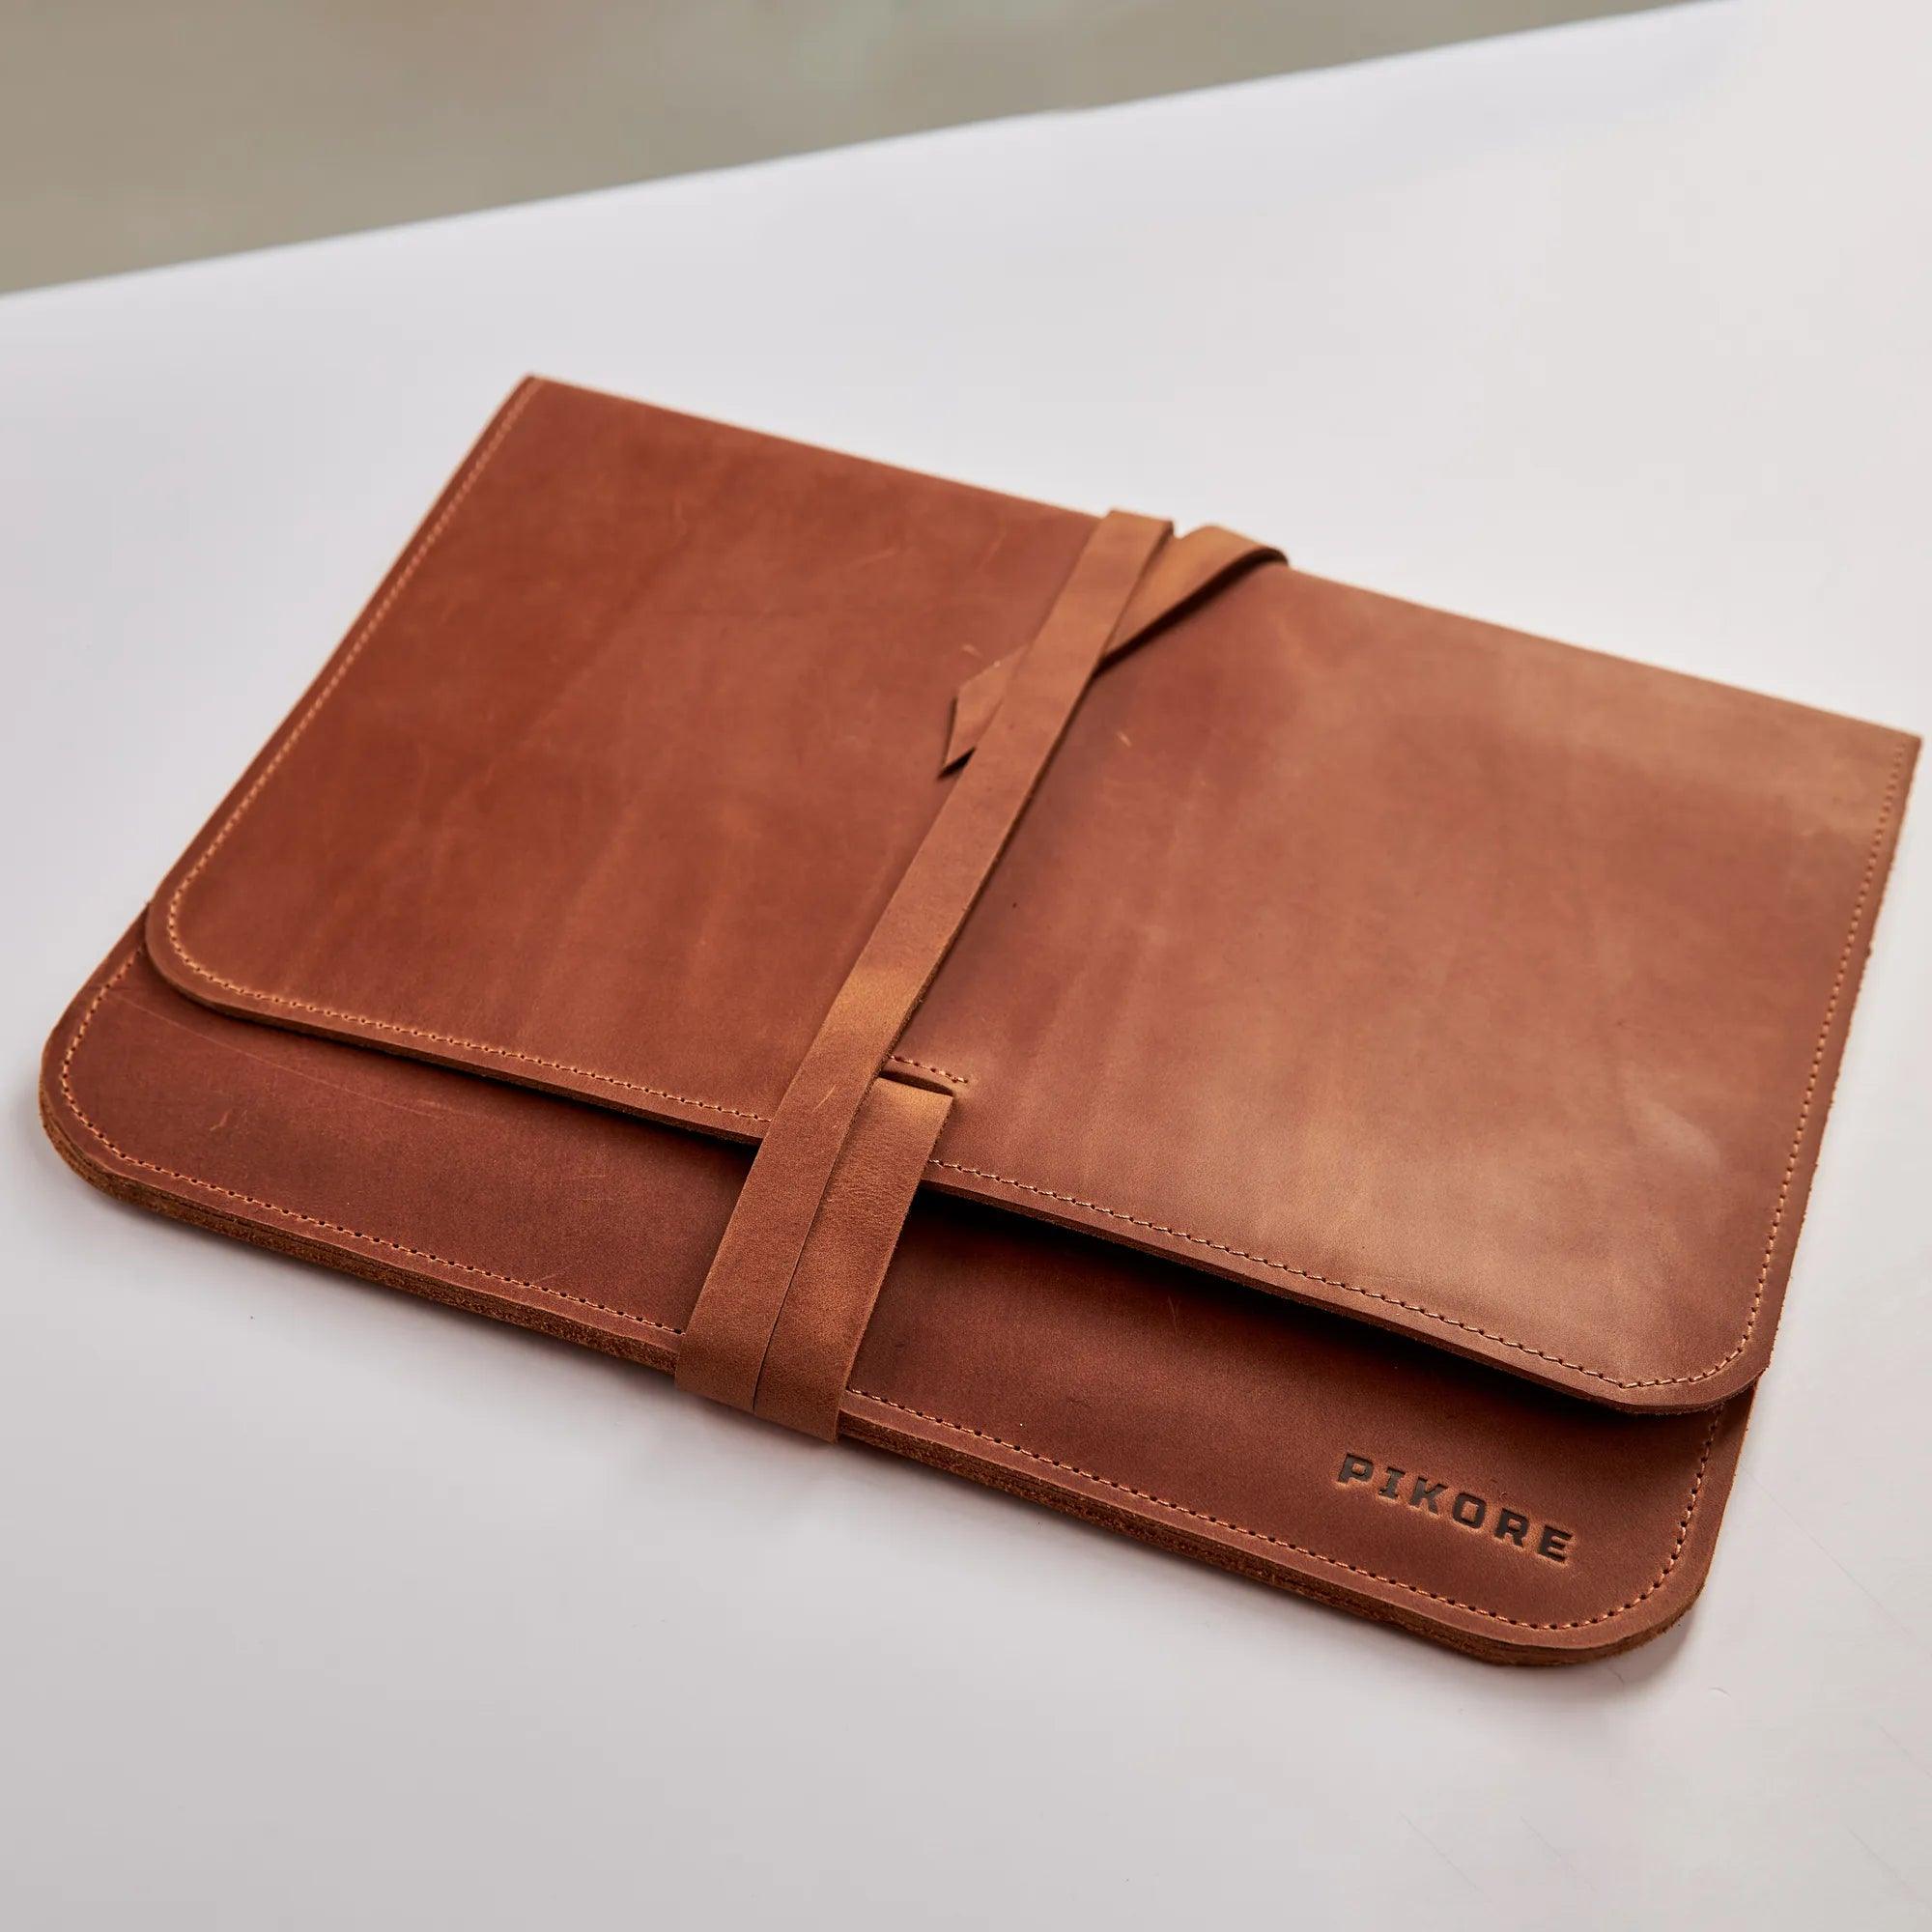 Leather Document Holder - Pikore